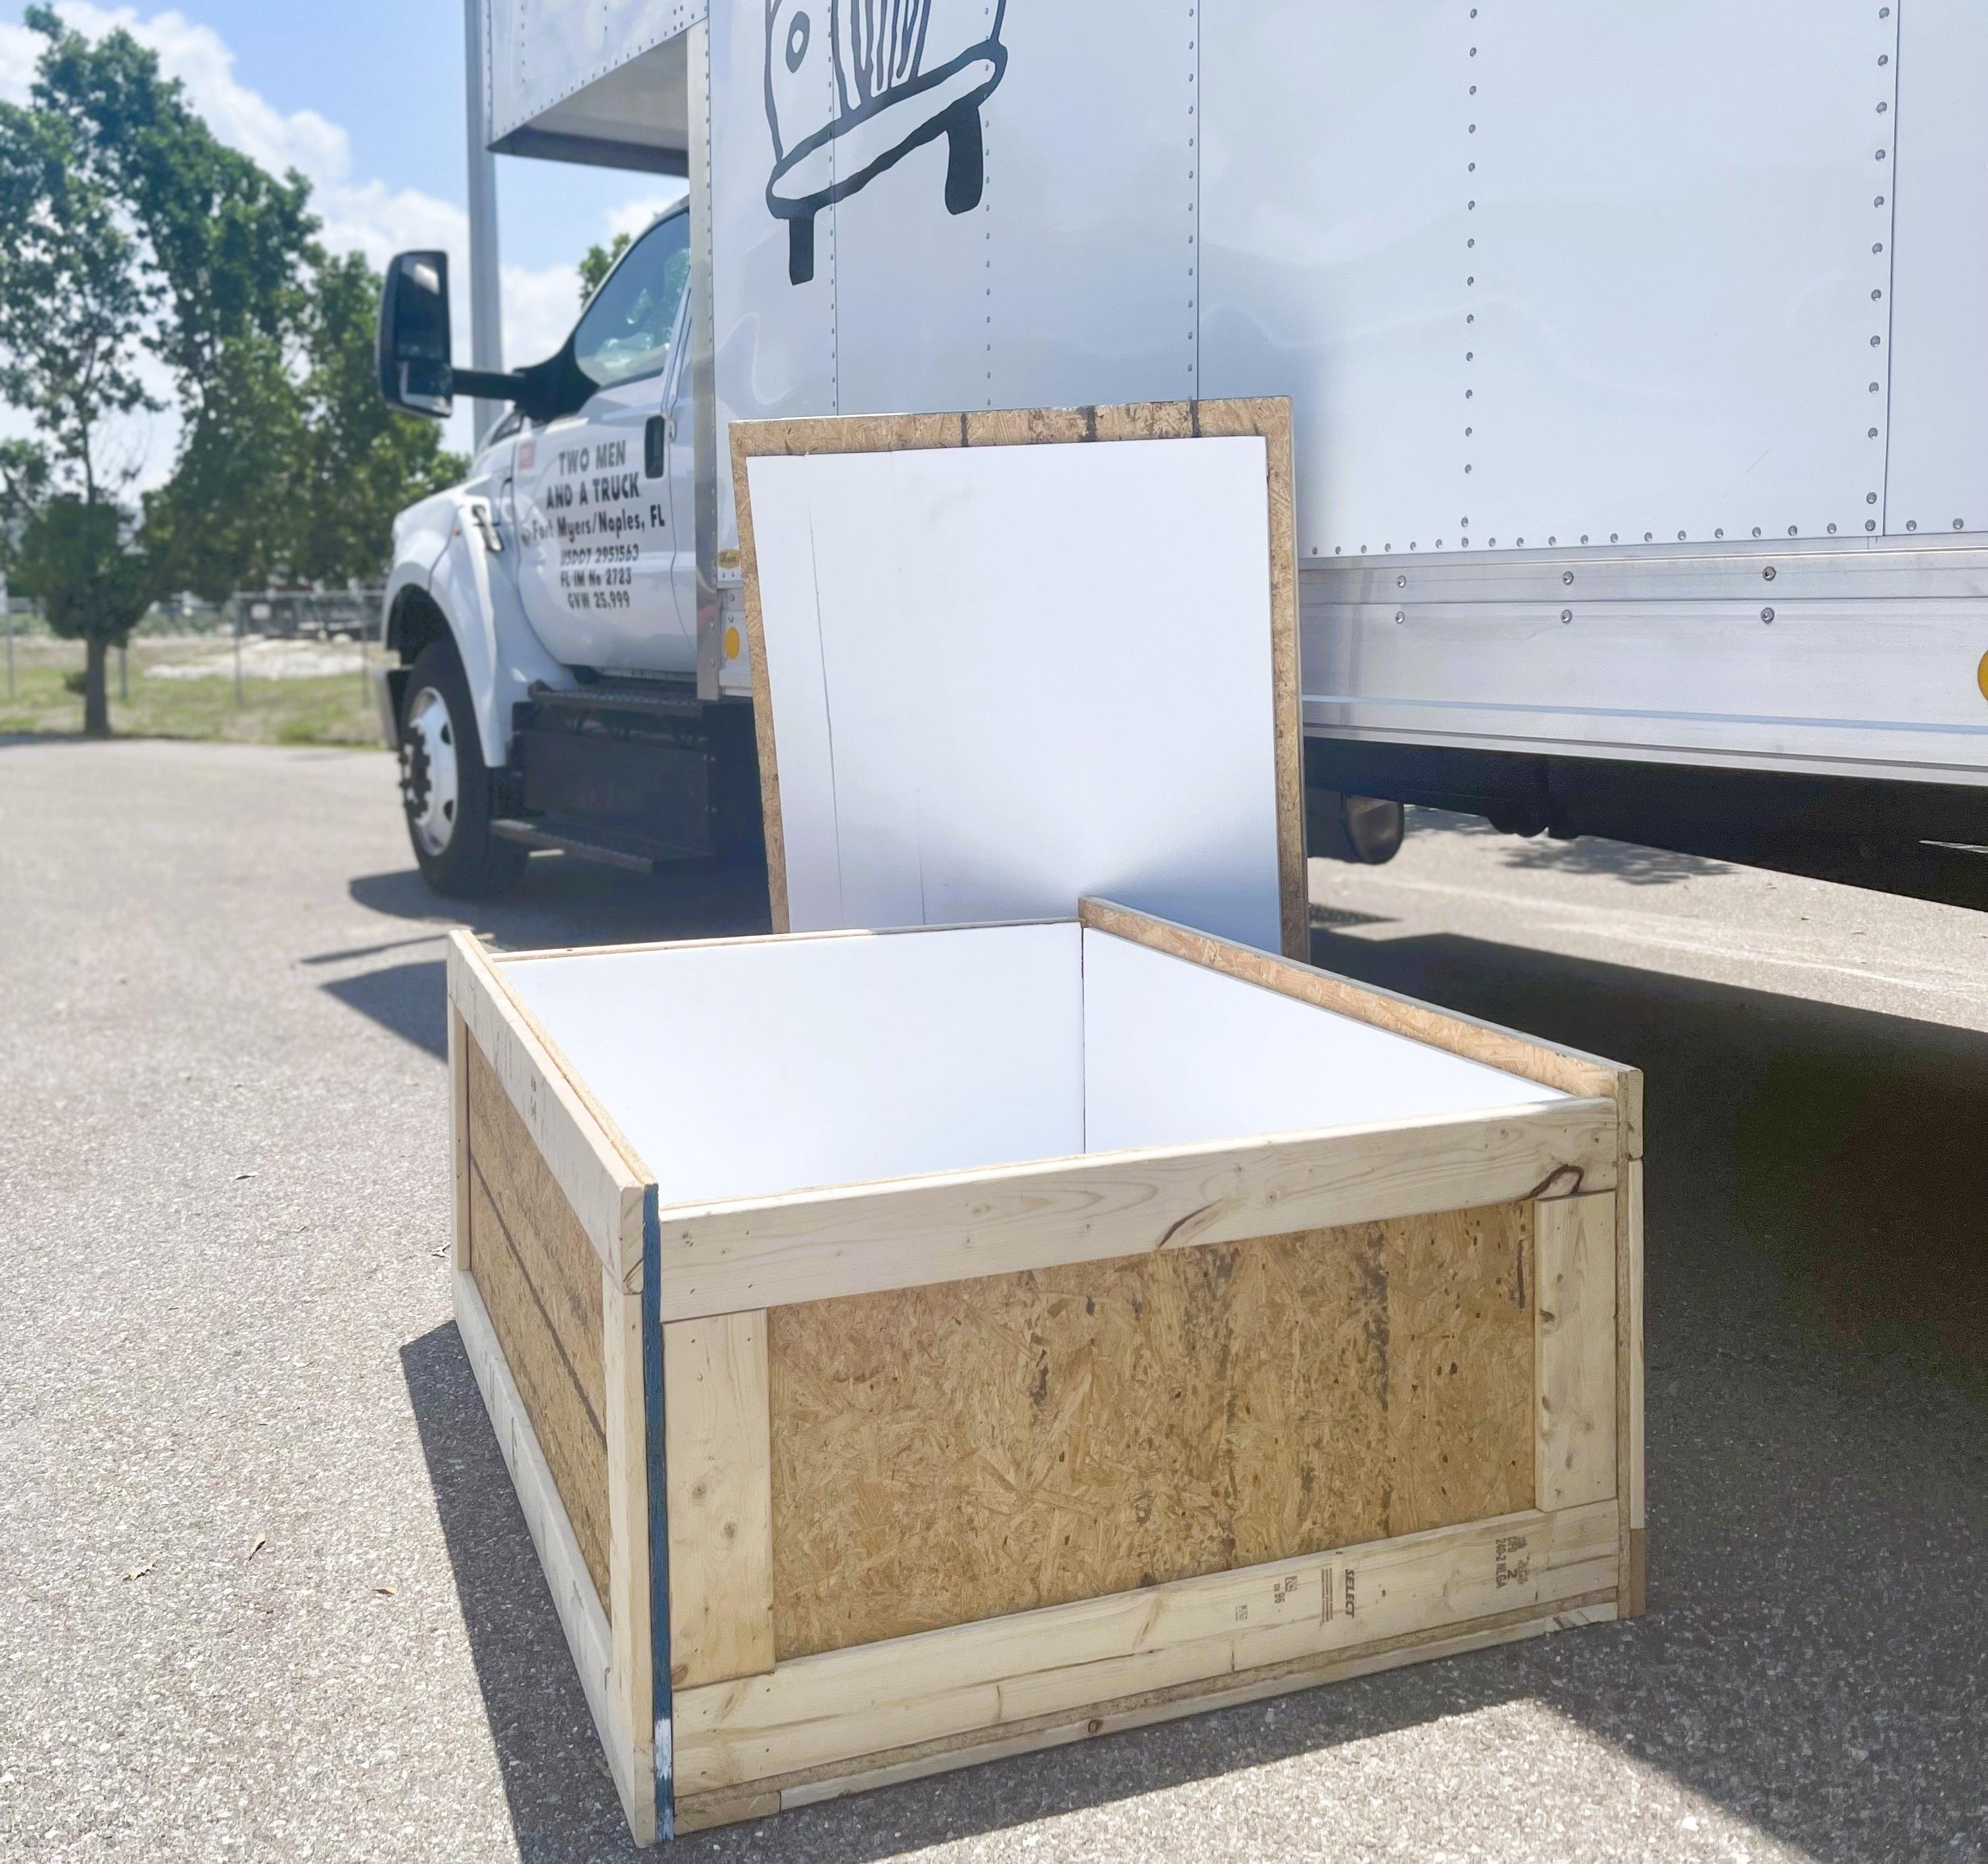 Moving crate shown on the ground, opened next to a moving truck